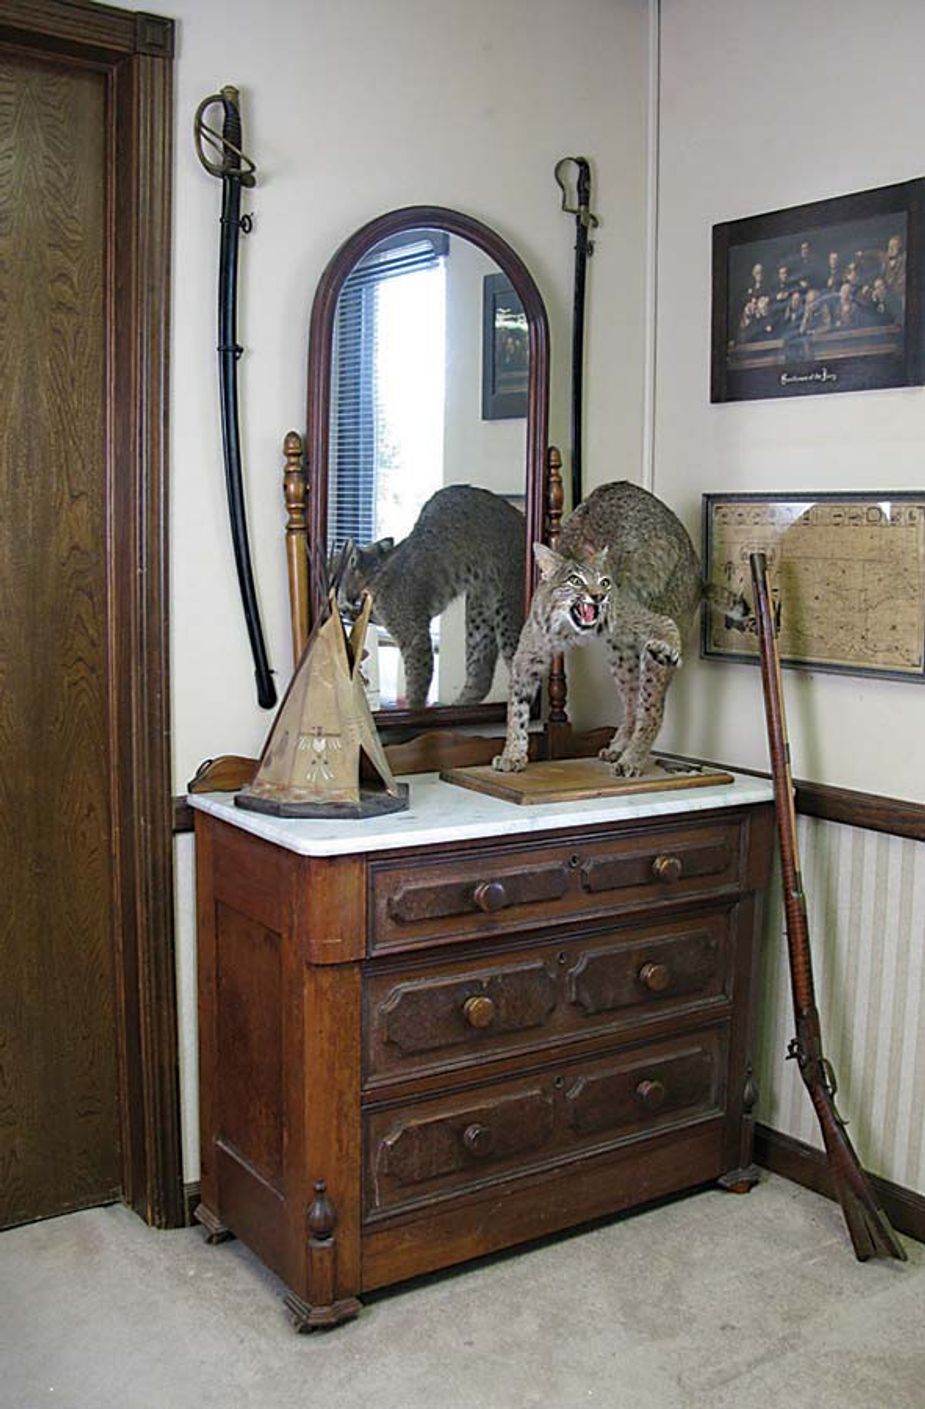 Owned by Fred Shaeffer of Norman, this dresser was part of a five-piece bedroom set that once belonged to Temple Houston. Prior to that, it was General George Custer’s. Photo by Steven Walker.